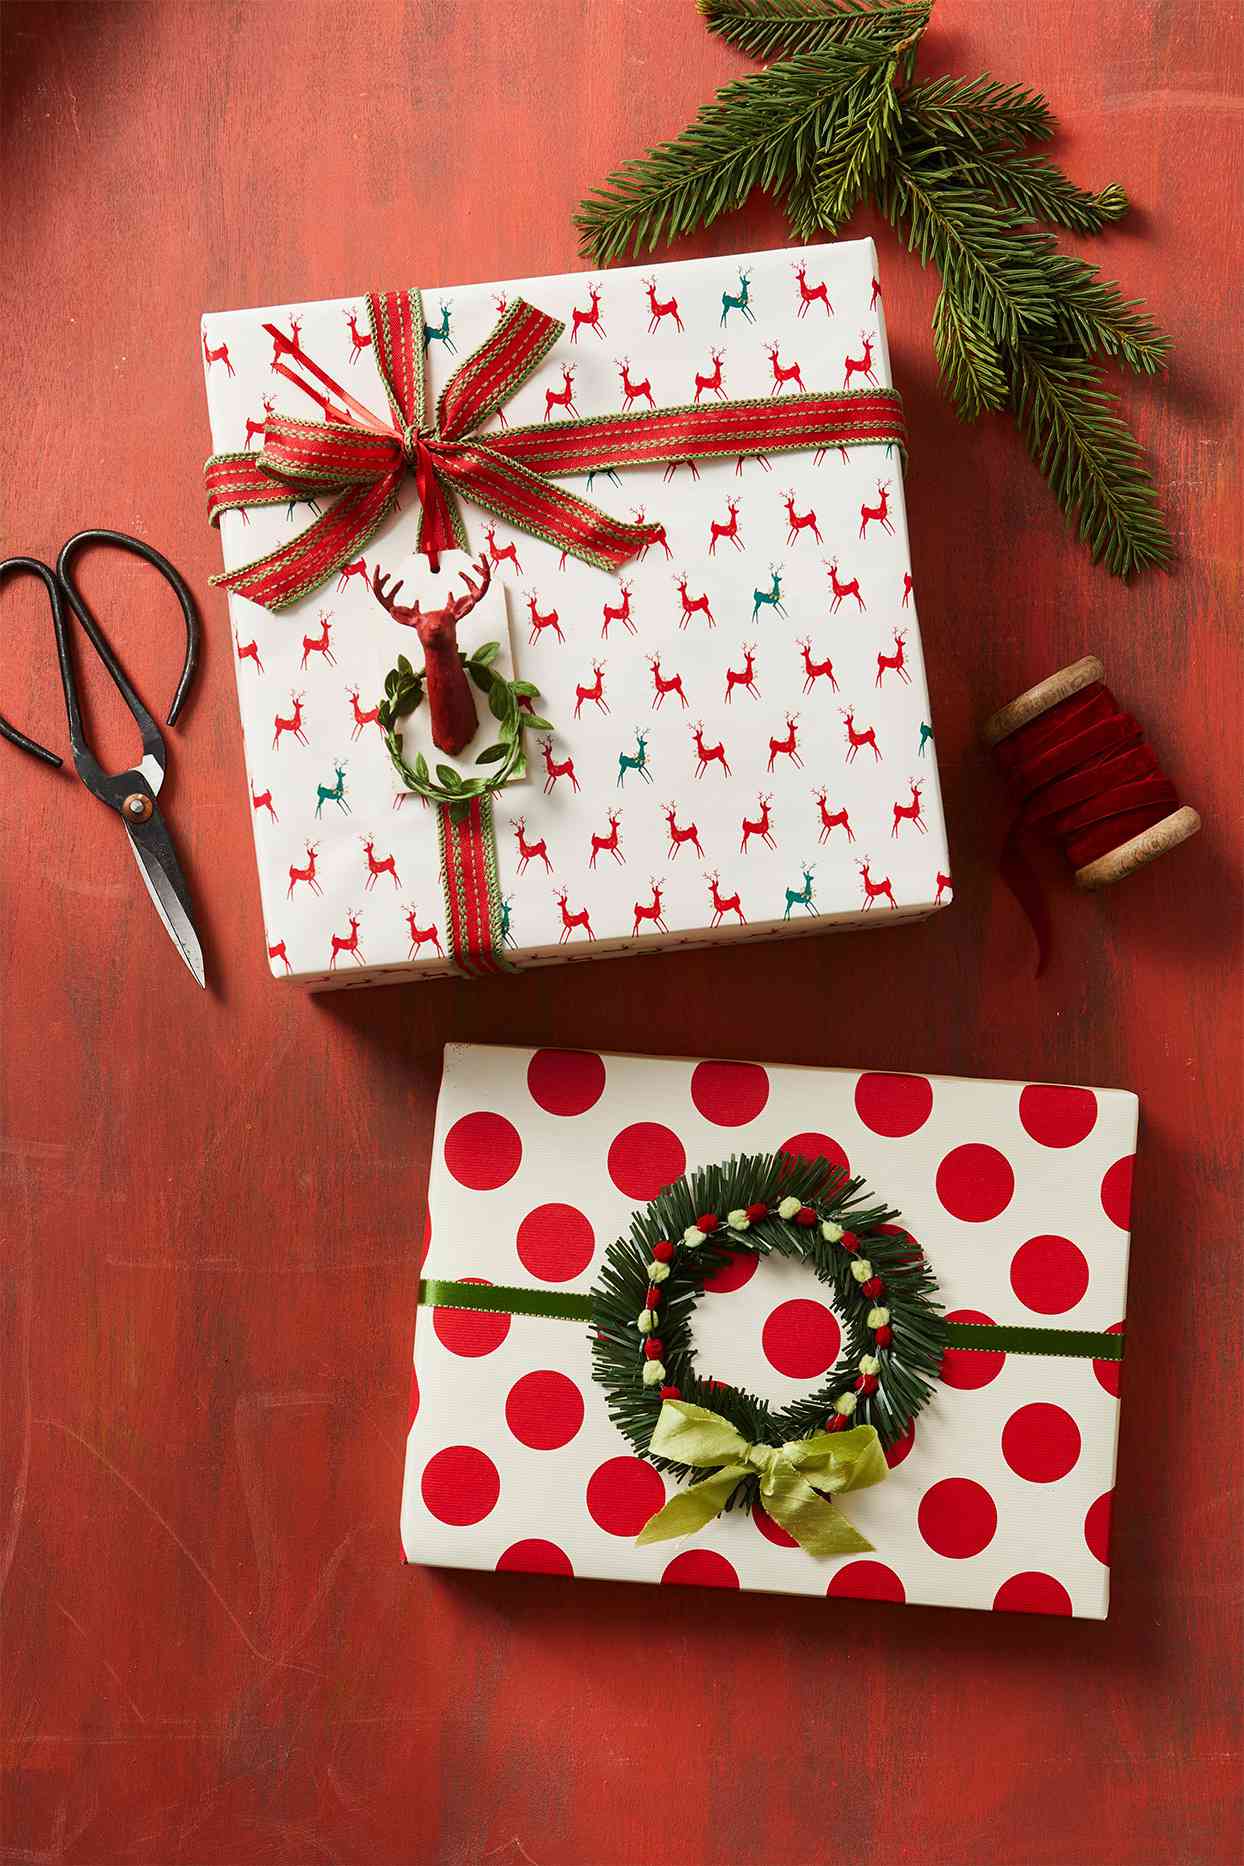 red and white wrapped gifts decorated with wreaths and supplies